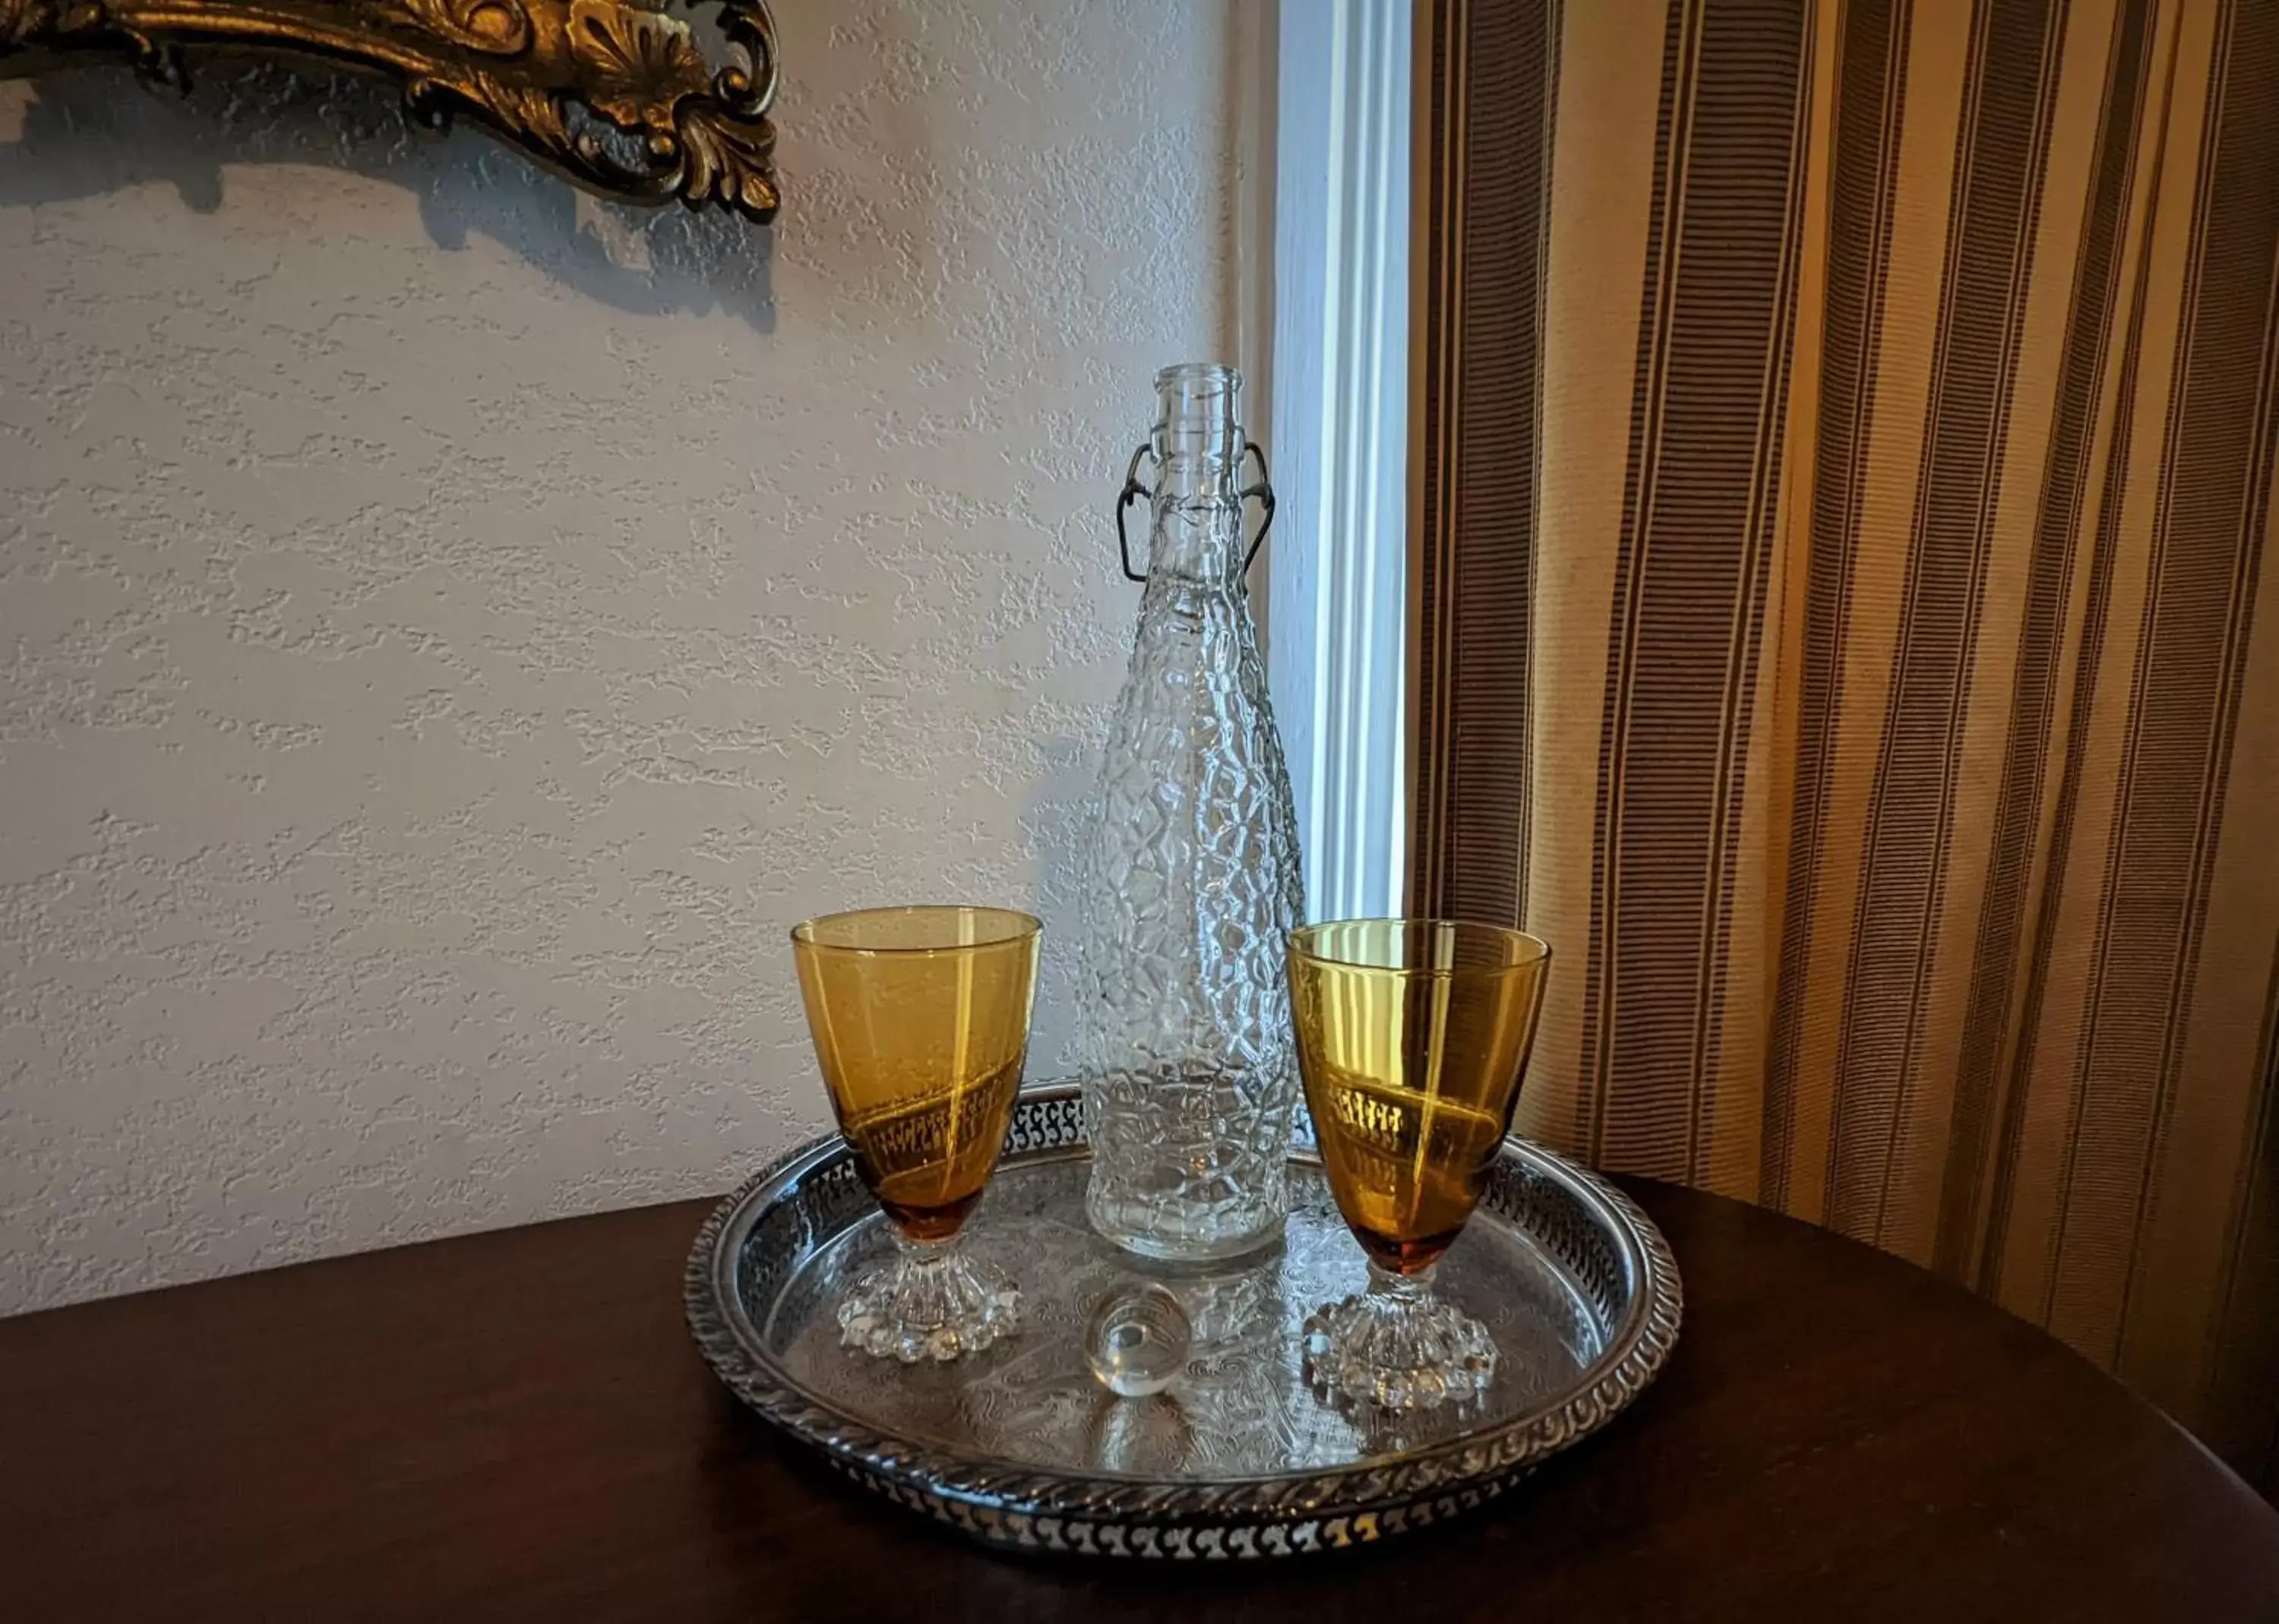 Drinks in The 1890 Freeman House